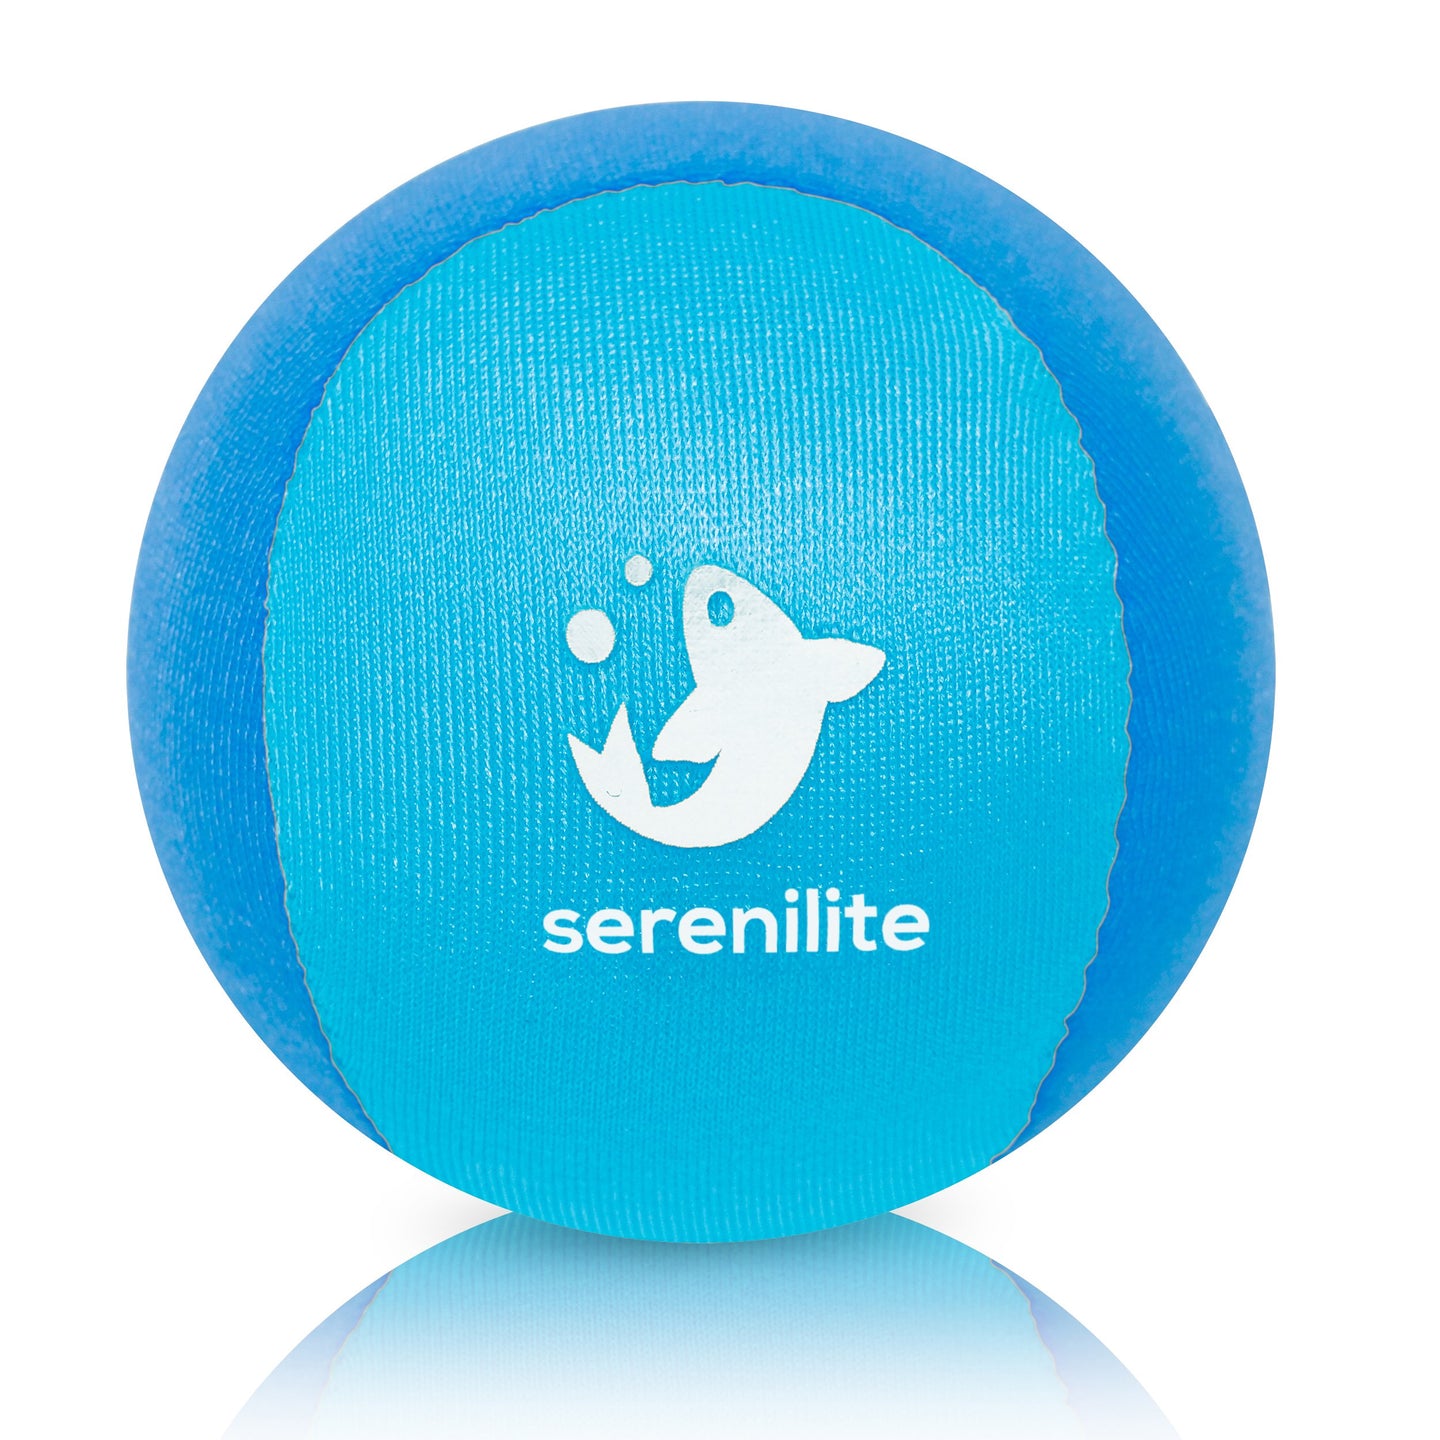 Serenilite Dual Colored Hand Therapy Stress Ball - Ocean Breeze